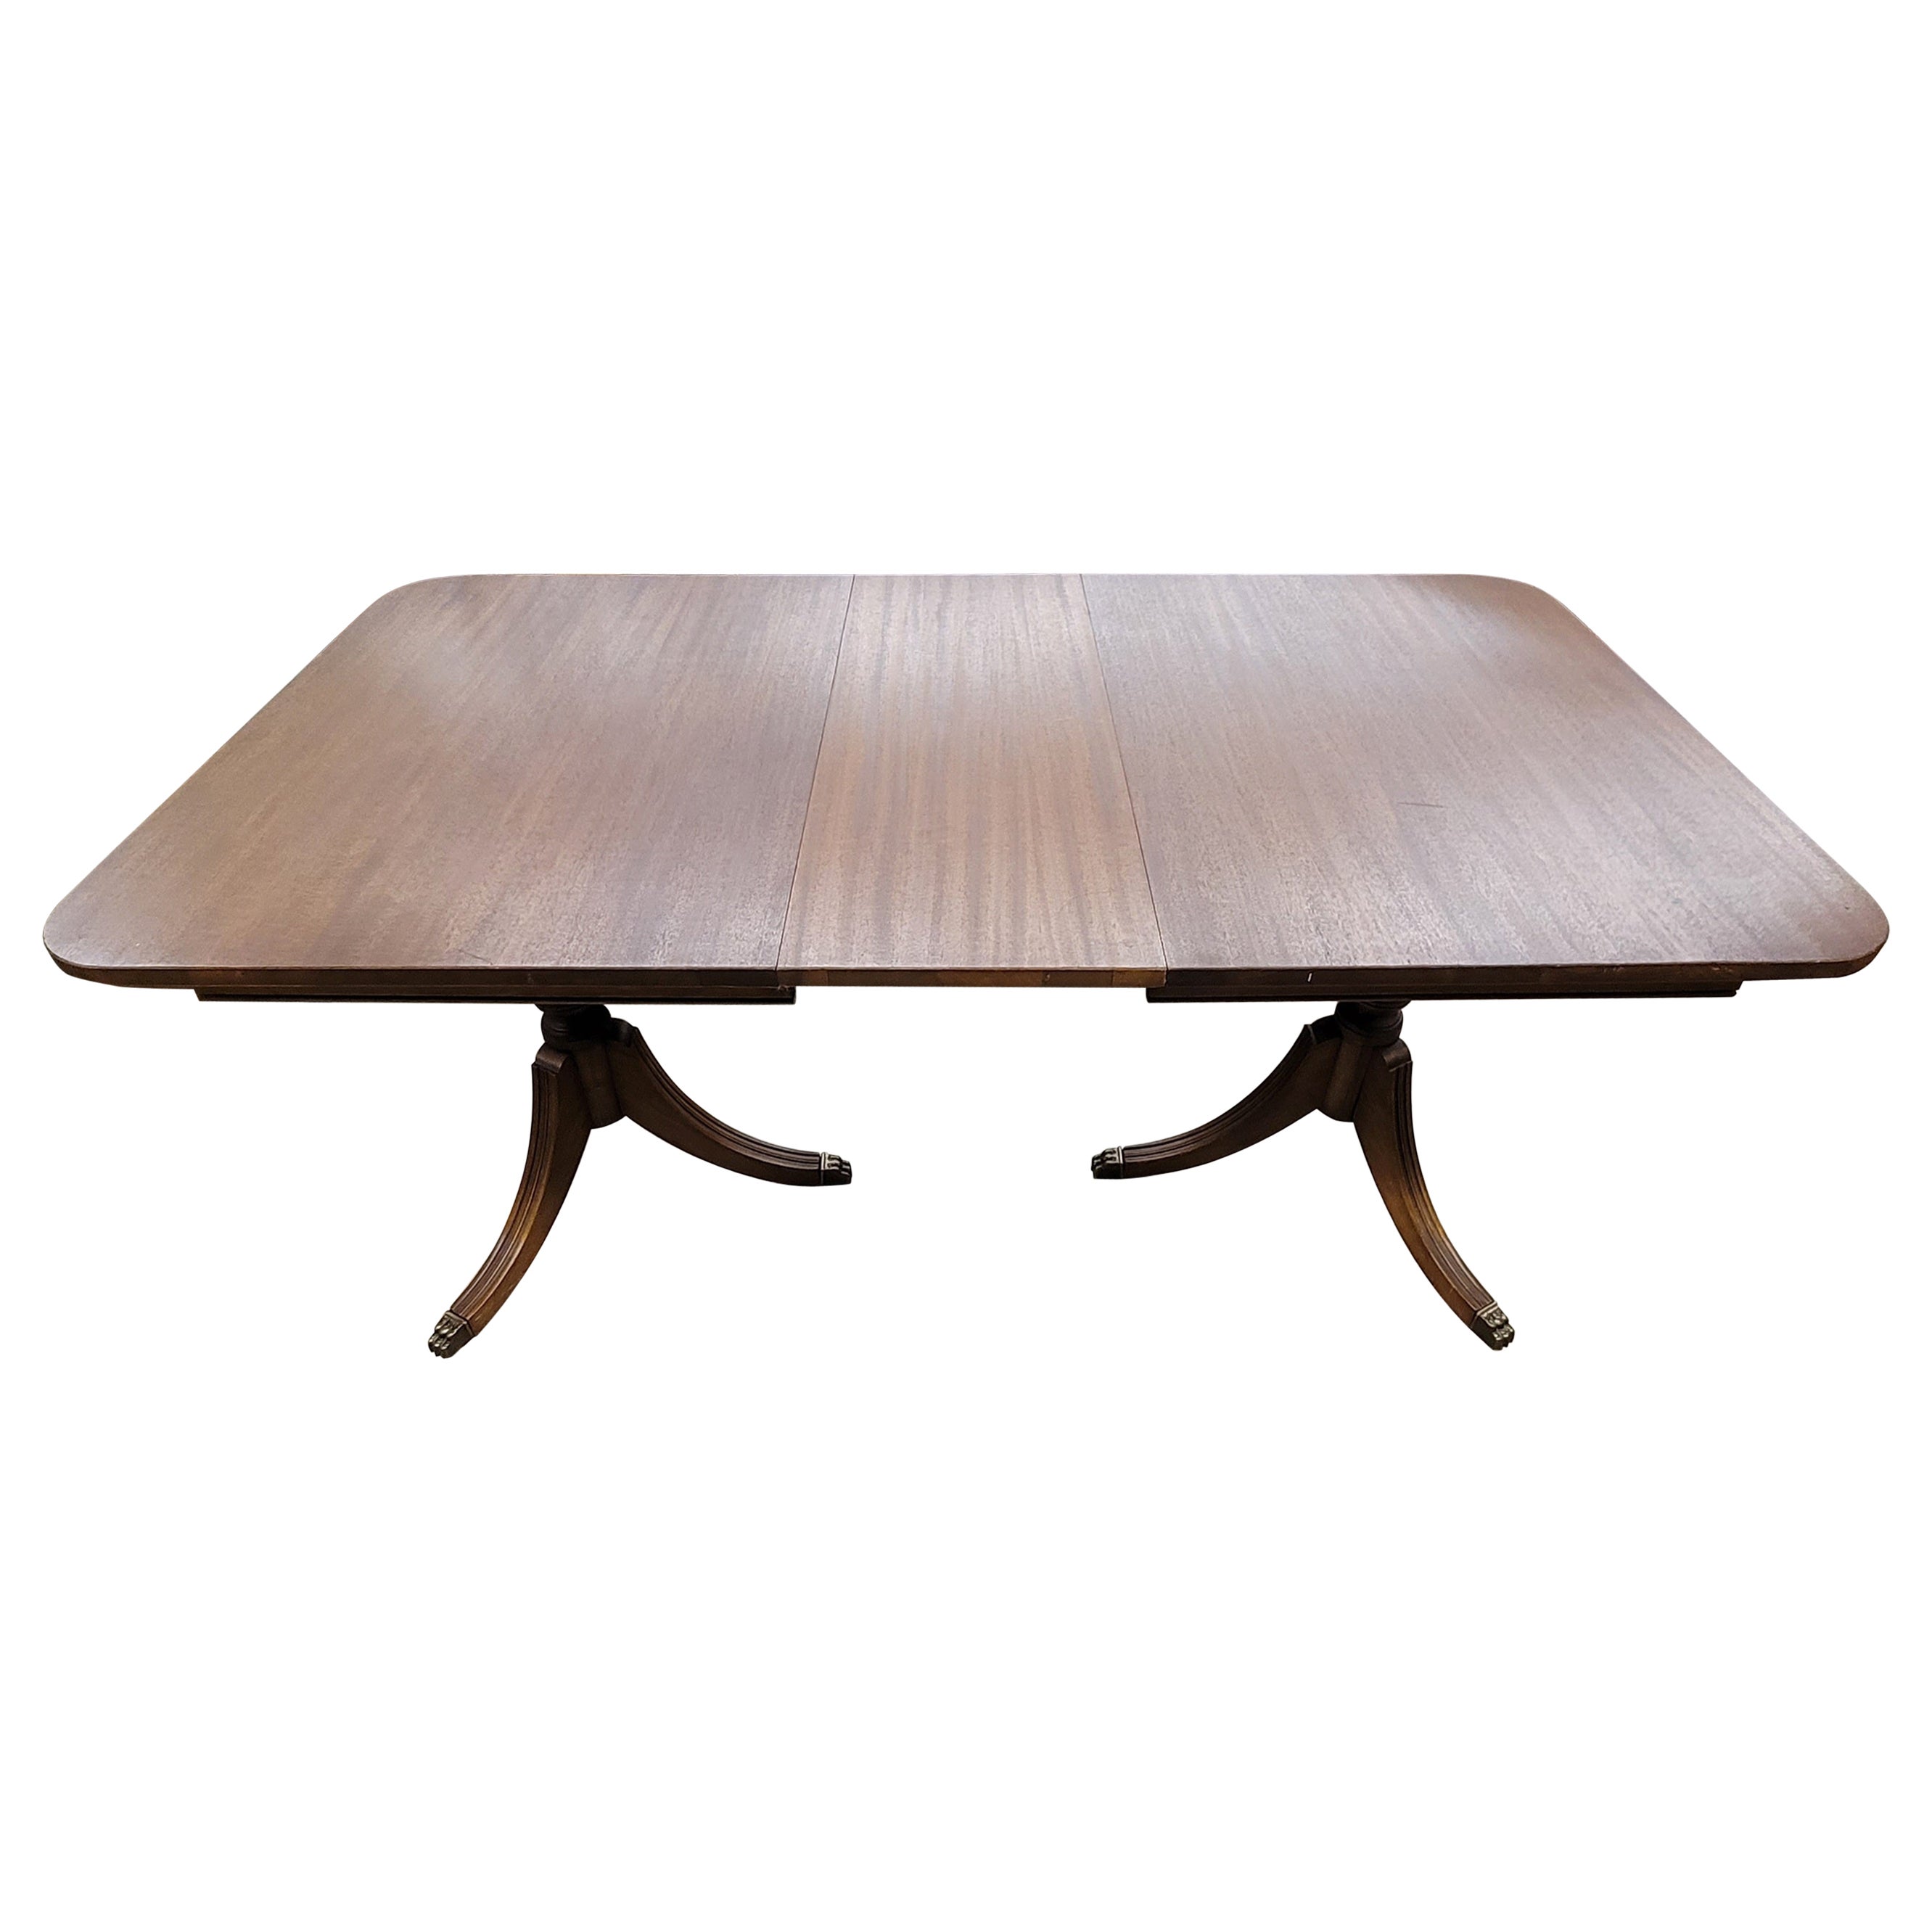 North American 1930s Newly Refinished Double Pedestal Mahogany Extension Dining Table For Sale